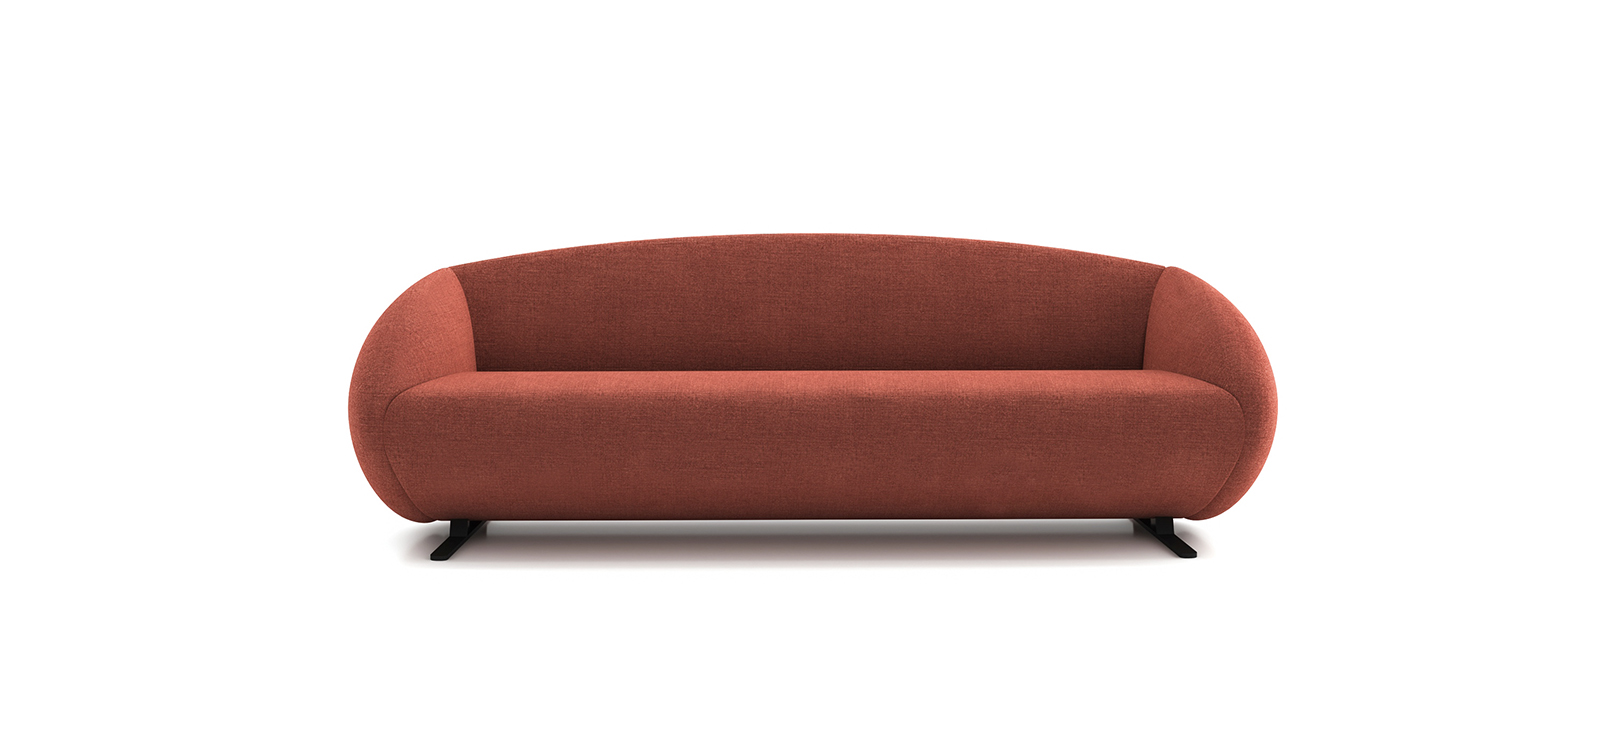 For Those Seeking Home Comfort in the Office: Setsu & Shinobu ITO's D-Armchair and Cigar Sofa at Zivella